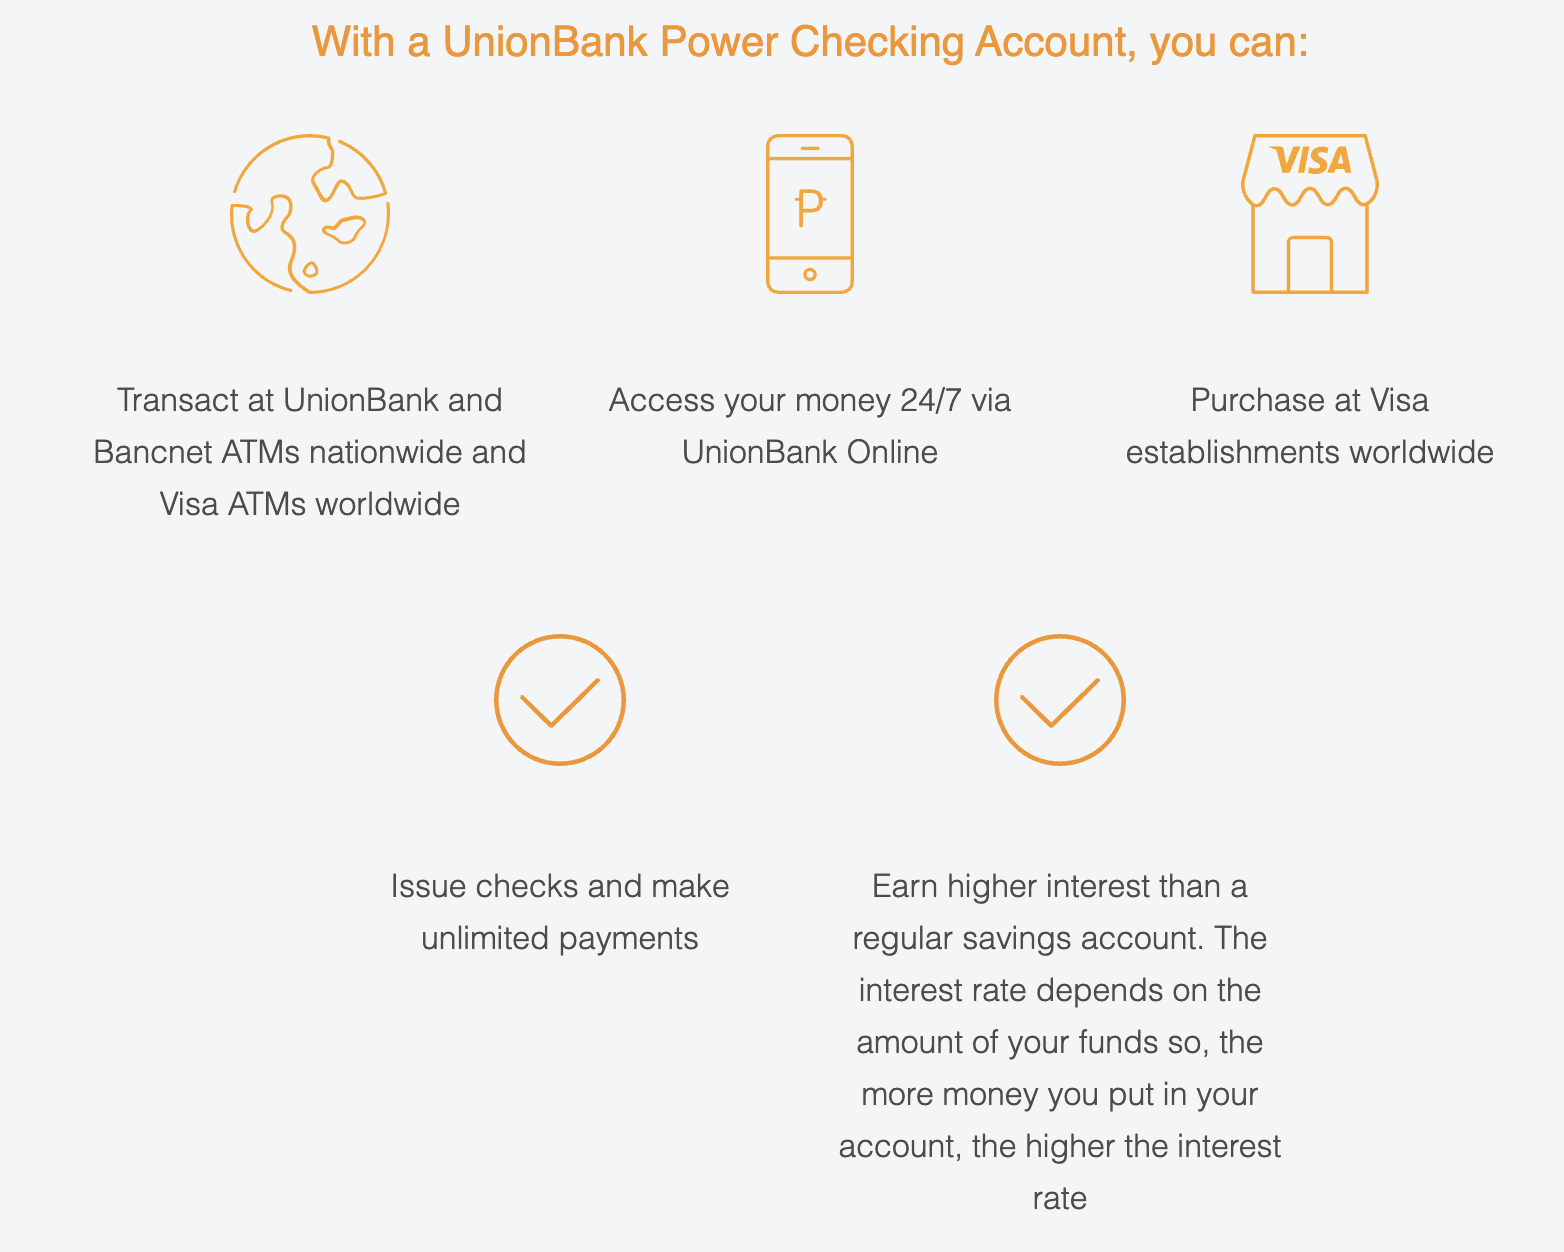 unionbank checking account - unionbank power checking account features